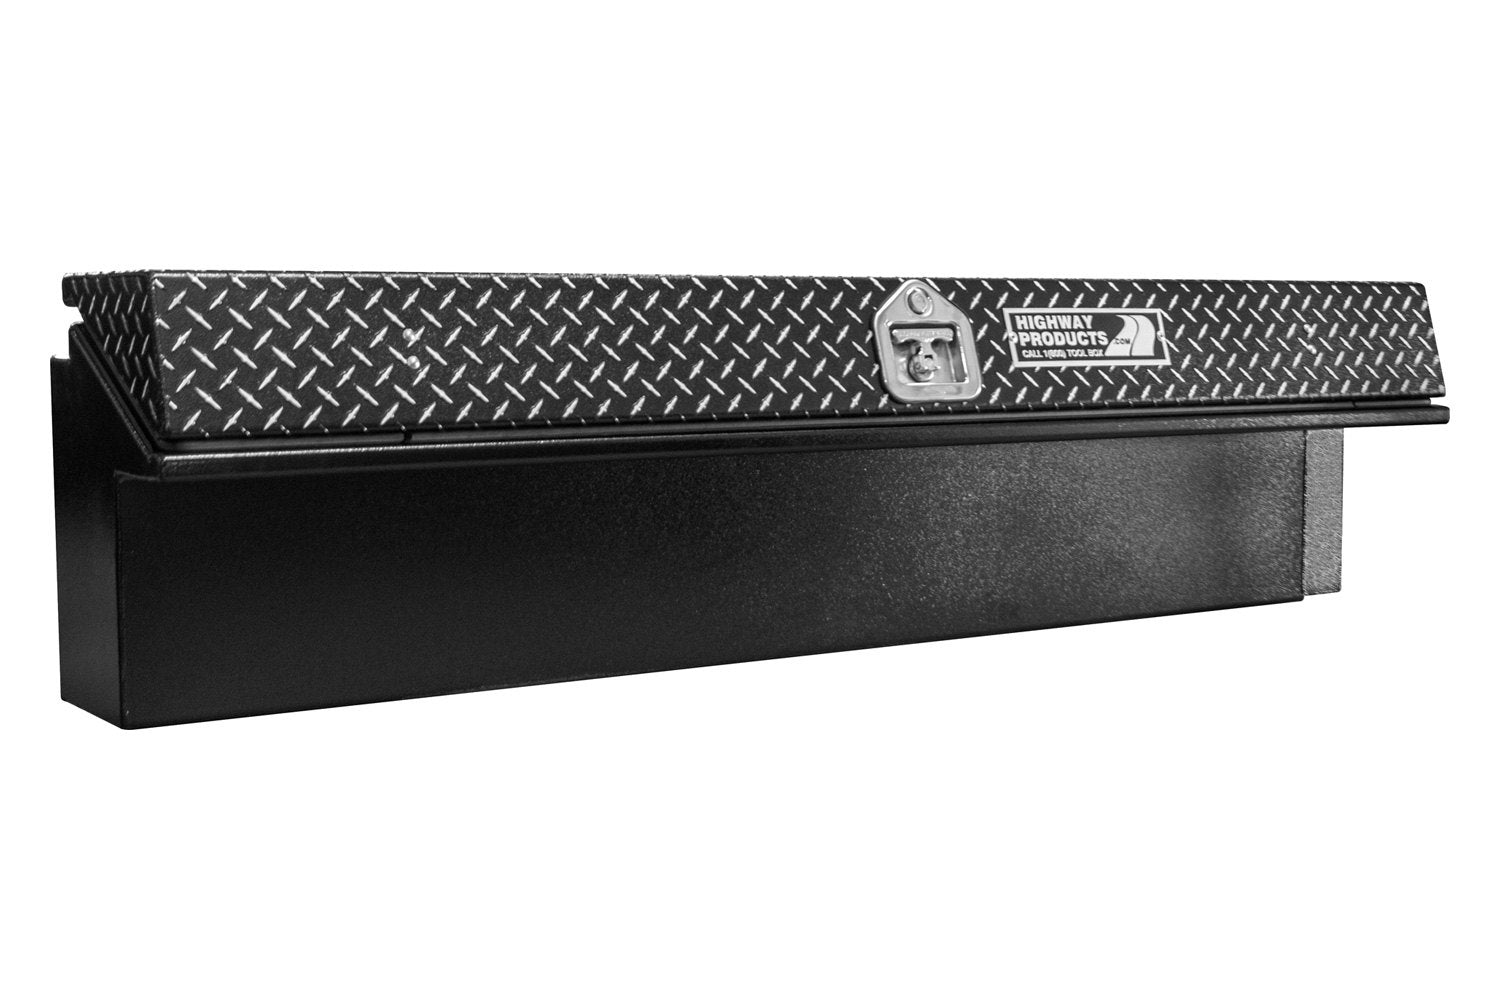 Highway Products Low-Side Tool Box Bright Diamond Plate Lid Aluminum 3712-003